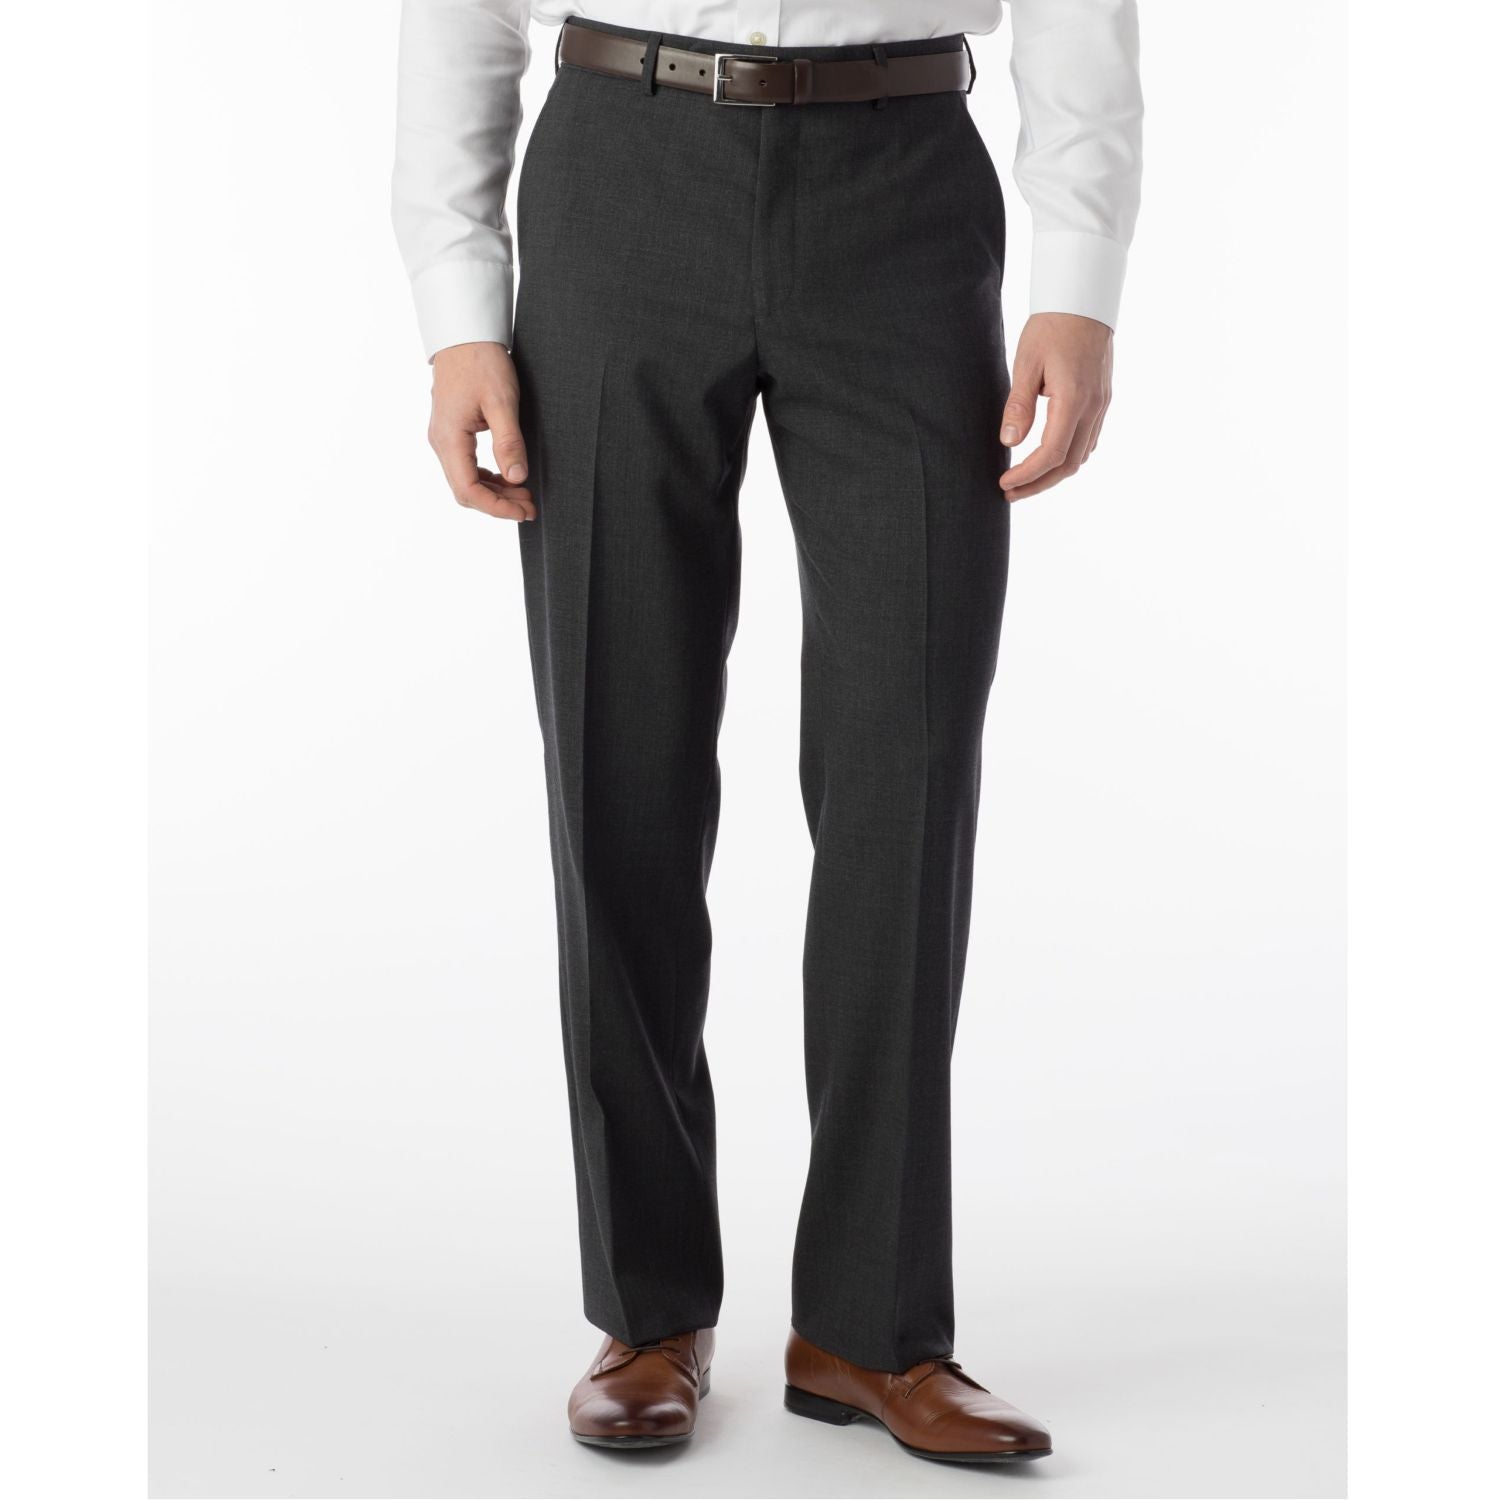 Super 120s Wool Travel Twill Comfort-EZE Trouser in Charcoal Grey, Size 38 (Soho Modern Fit) by Ballin